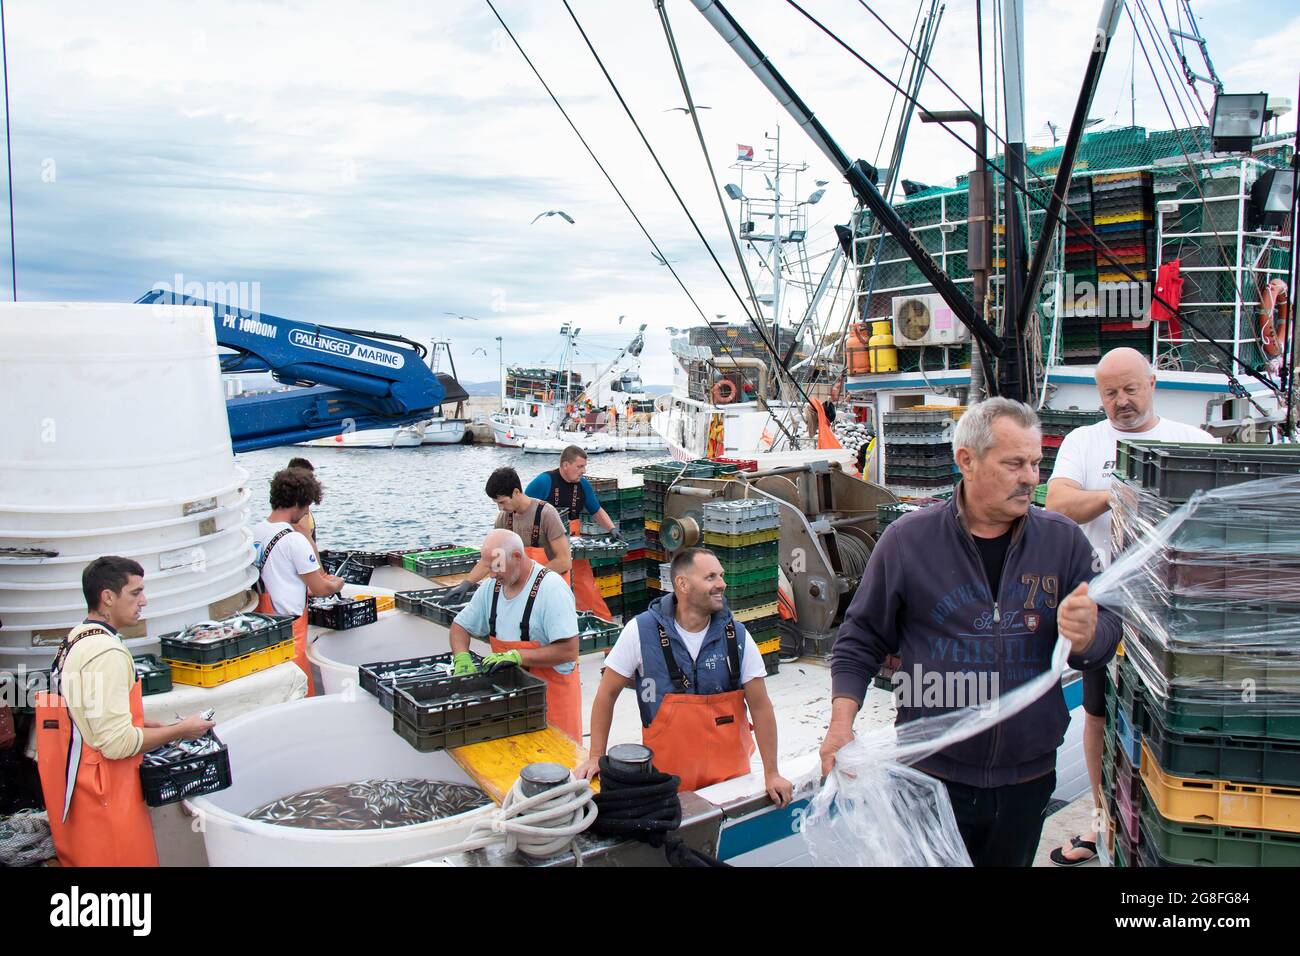 Tribunj, Croatia - July 4, 2021: Fishermen sorting out the catch on a deck of a moored commercial fishing boat Stock Photo